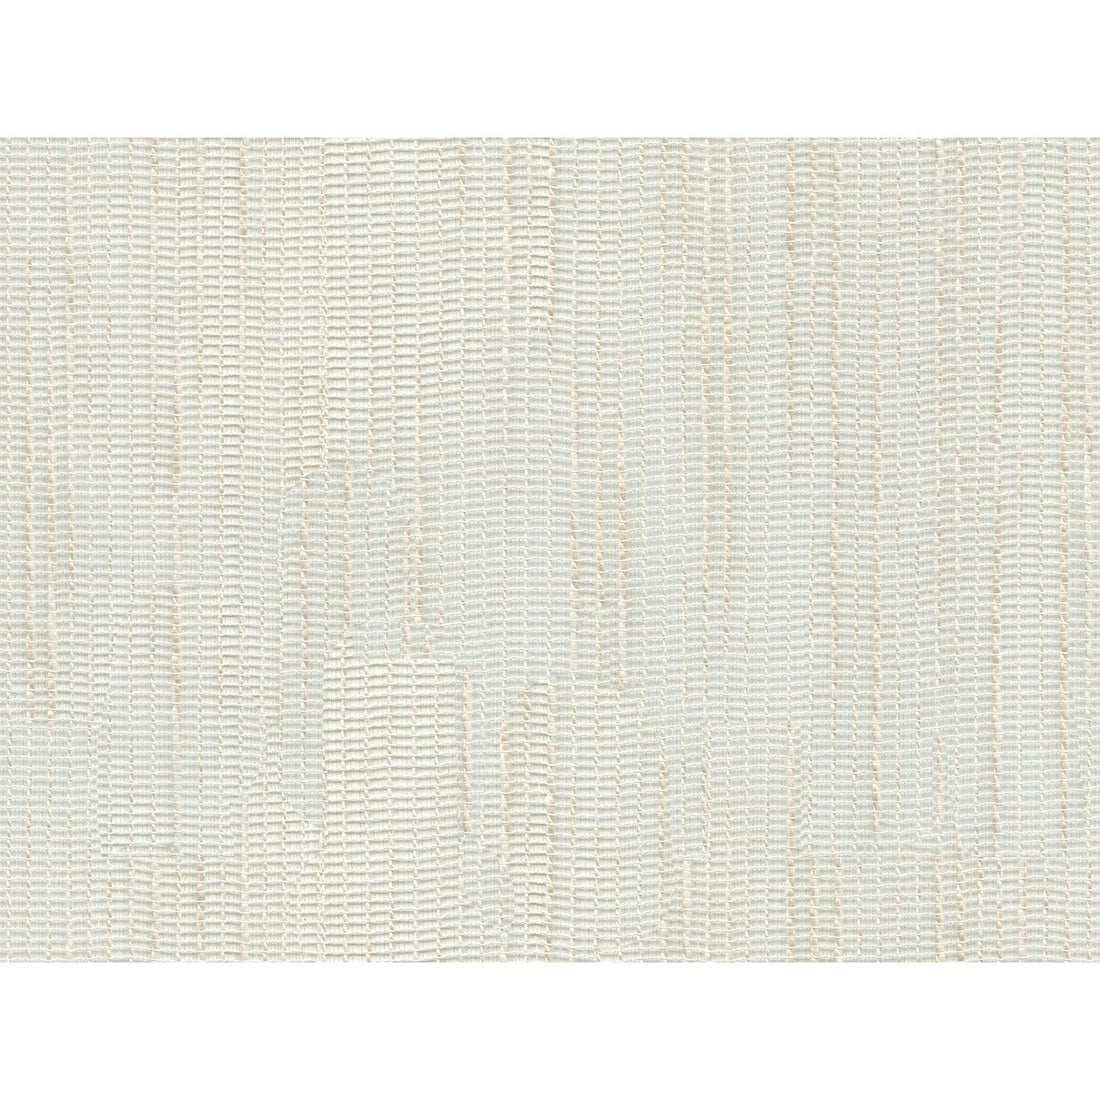 Kravet Contract fabric in 4543-1 color - pattern 4543.1.0 - by Kravet Contract